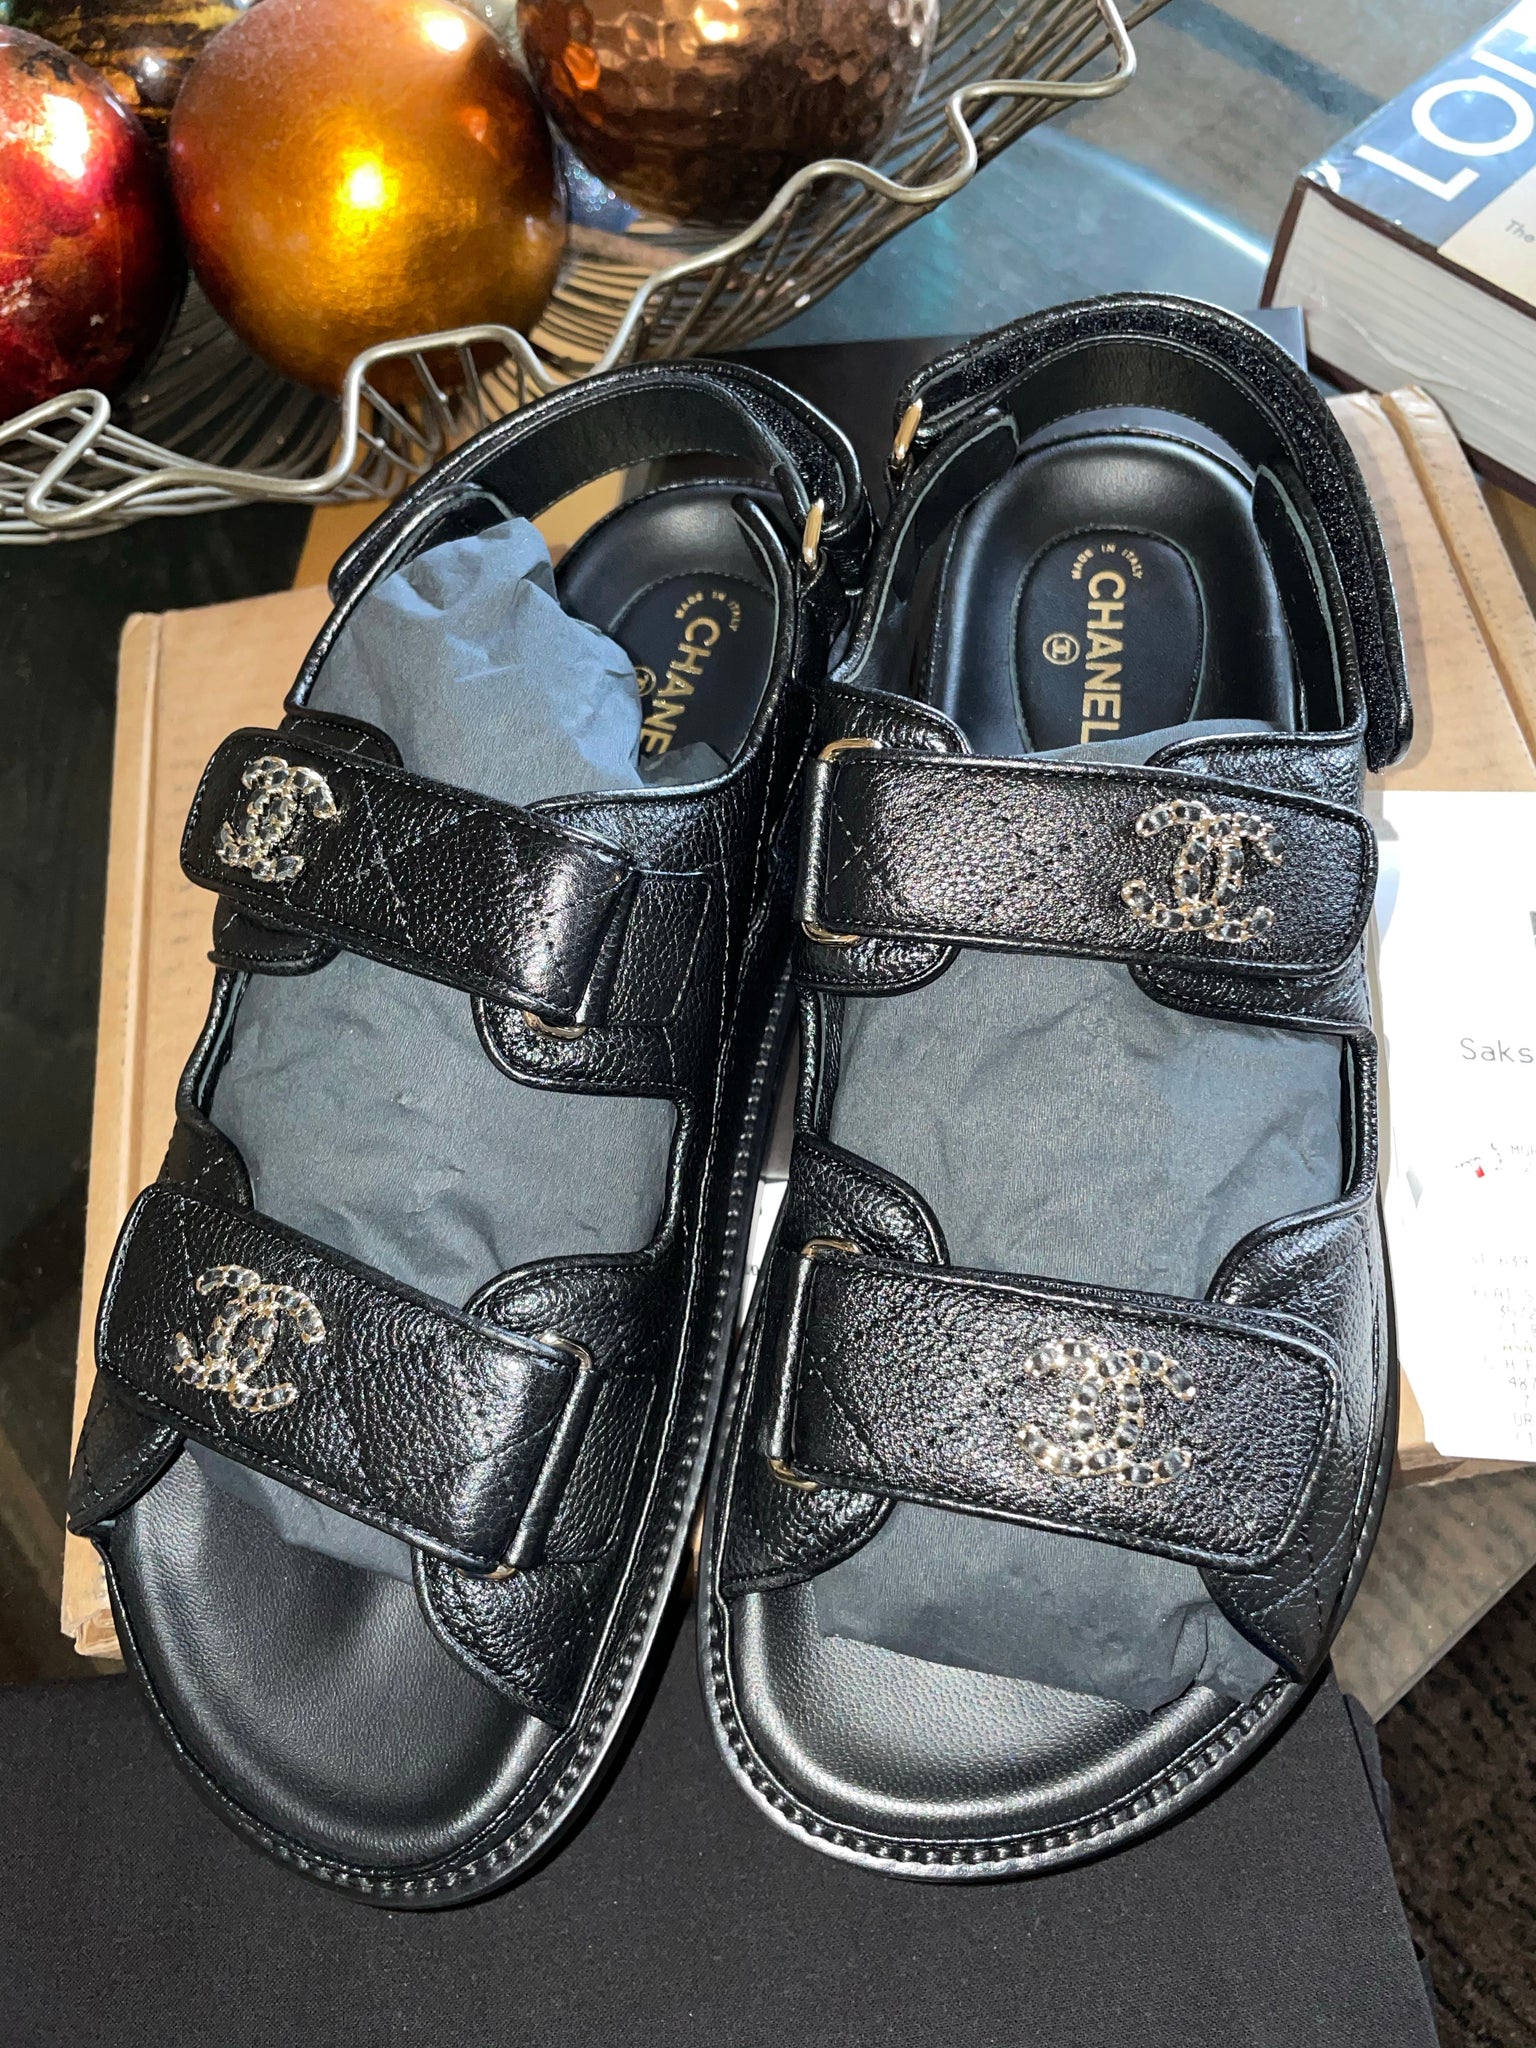 Chanel - Authenticated Dad Sandals Sandal - Cloth Multicolour Abstract for Women, Very Good Condition